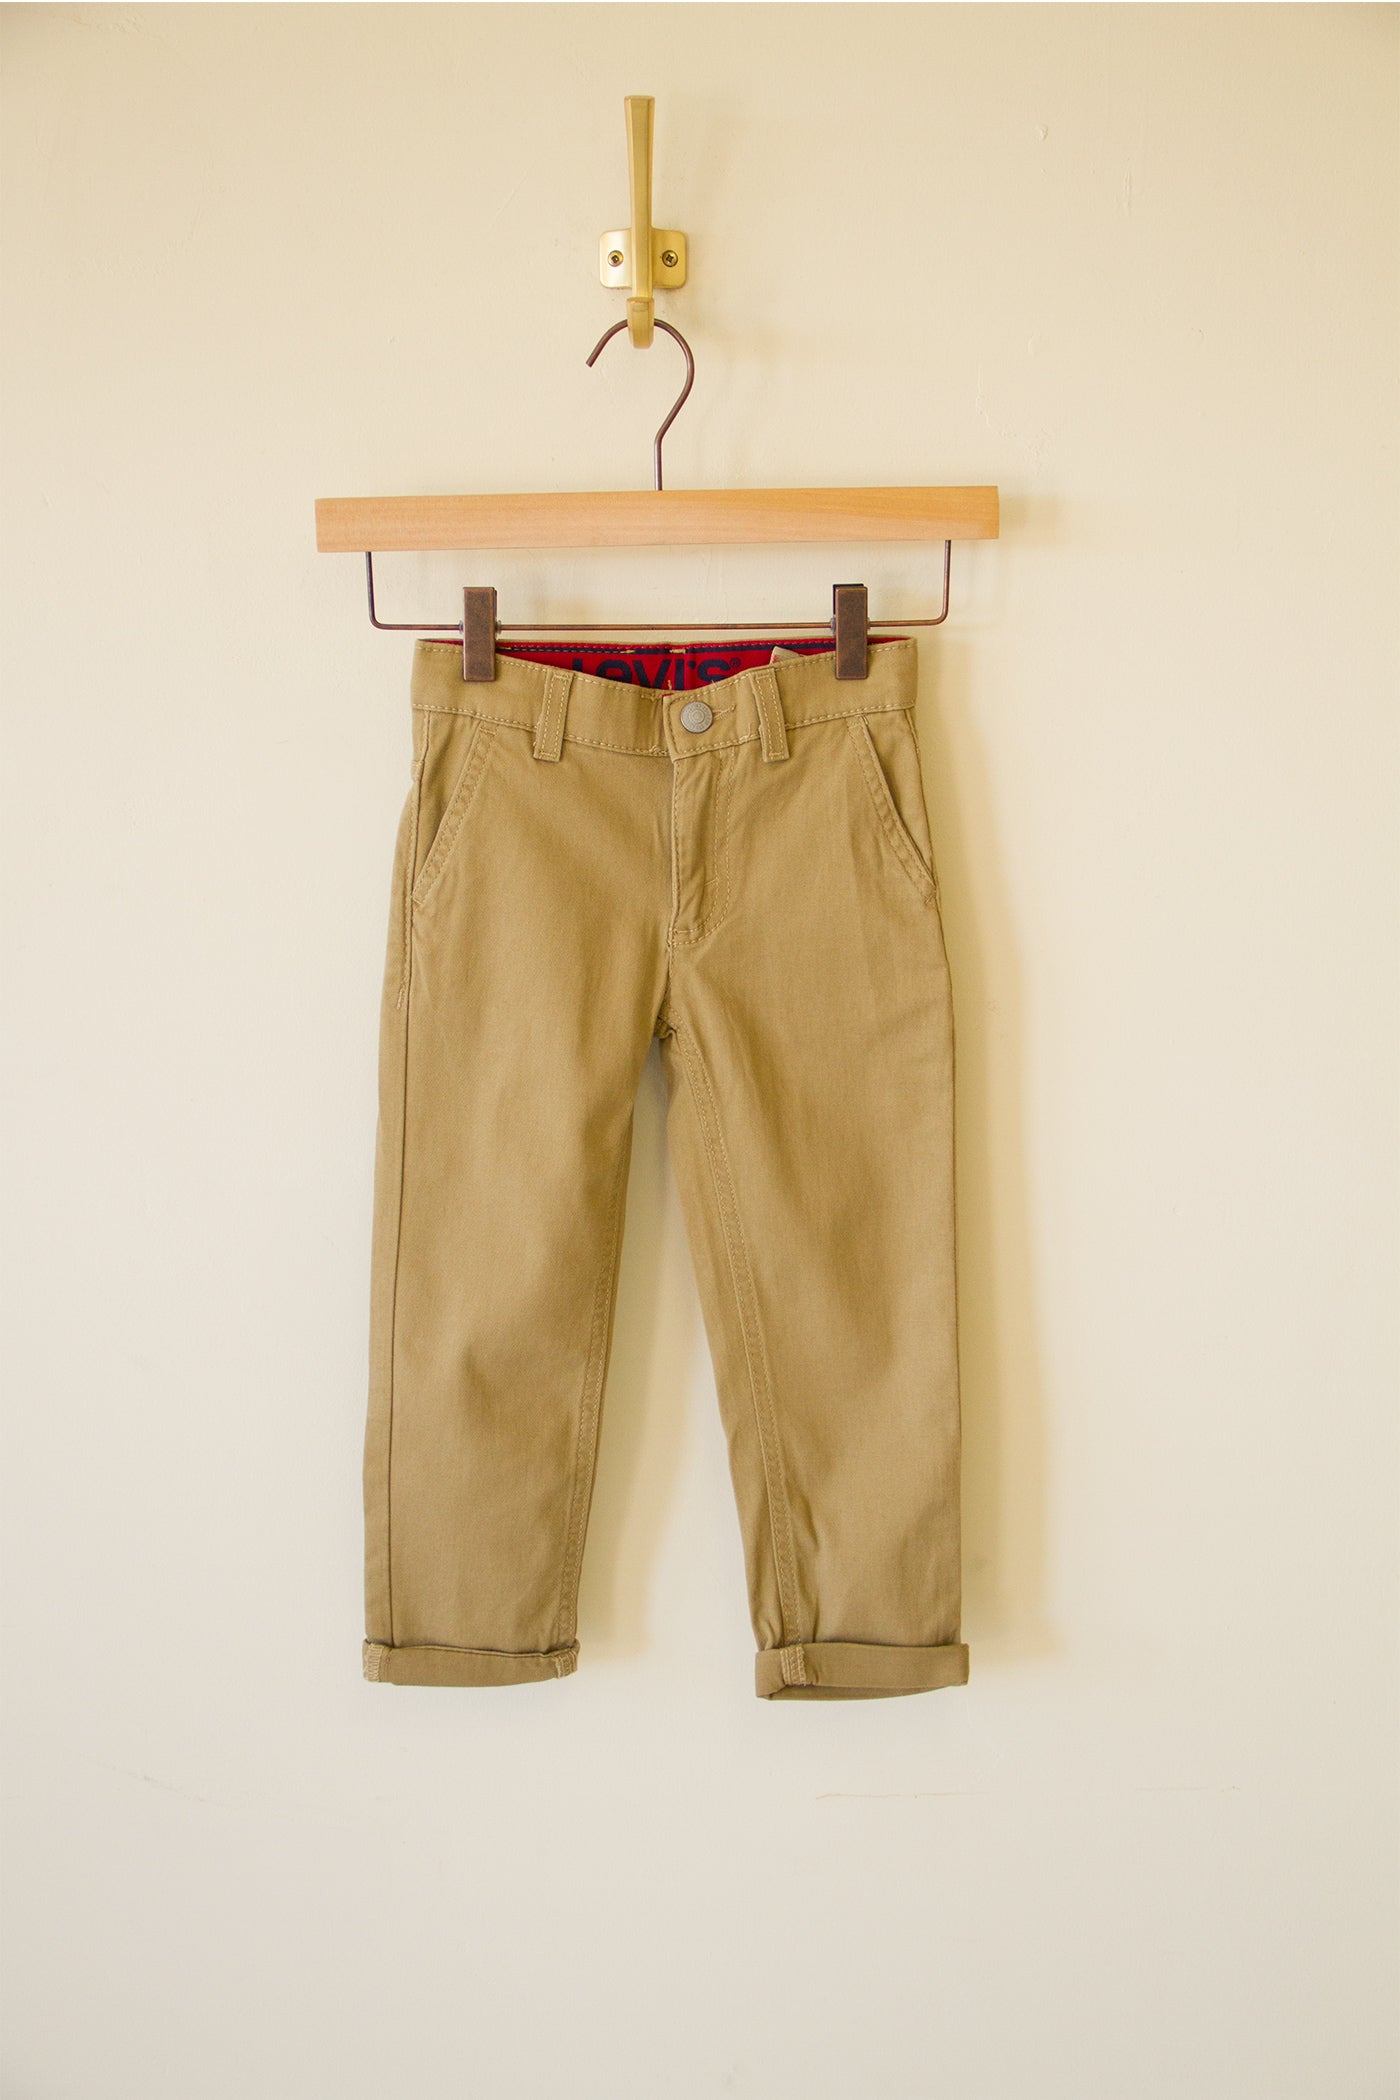 502 Taper Chinos Kids Pants by Levi's